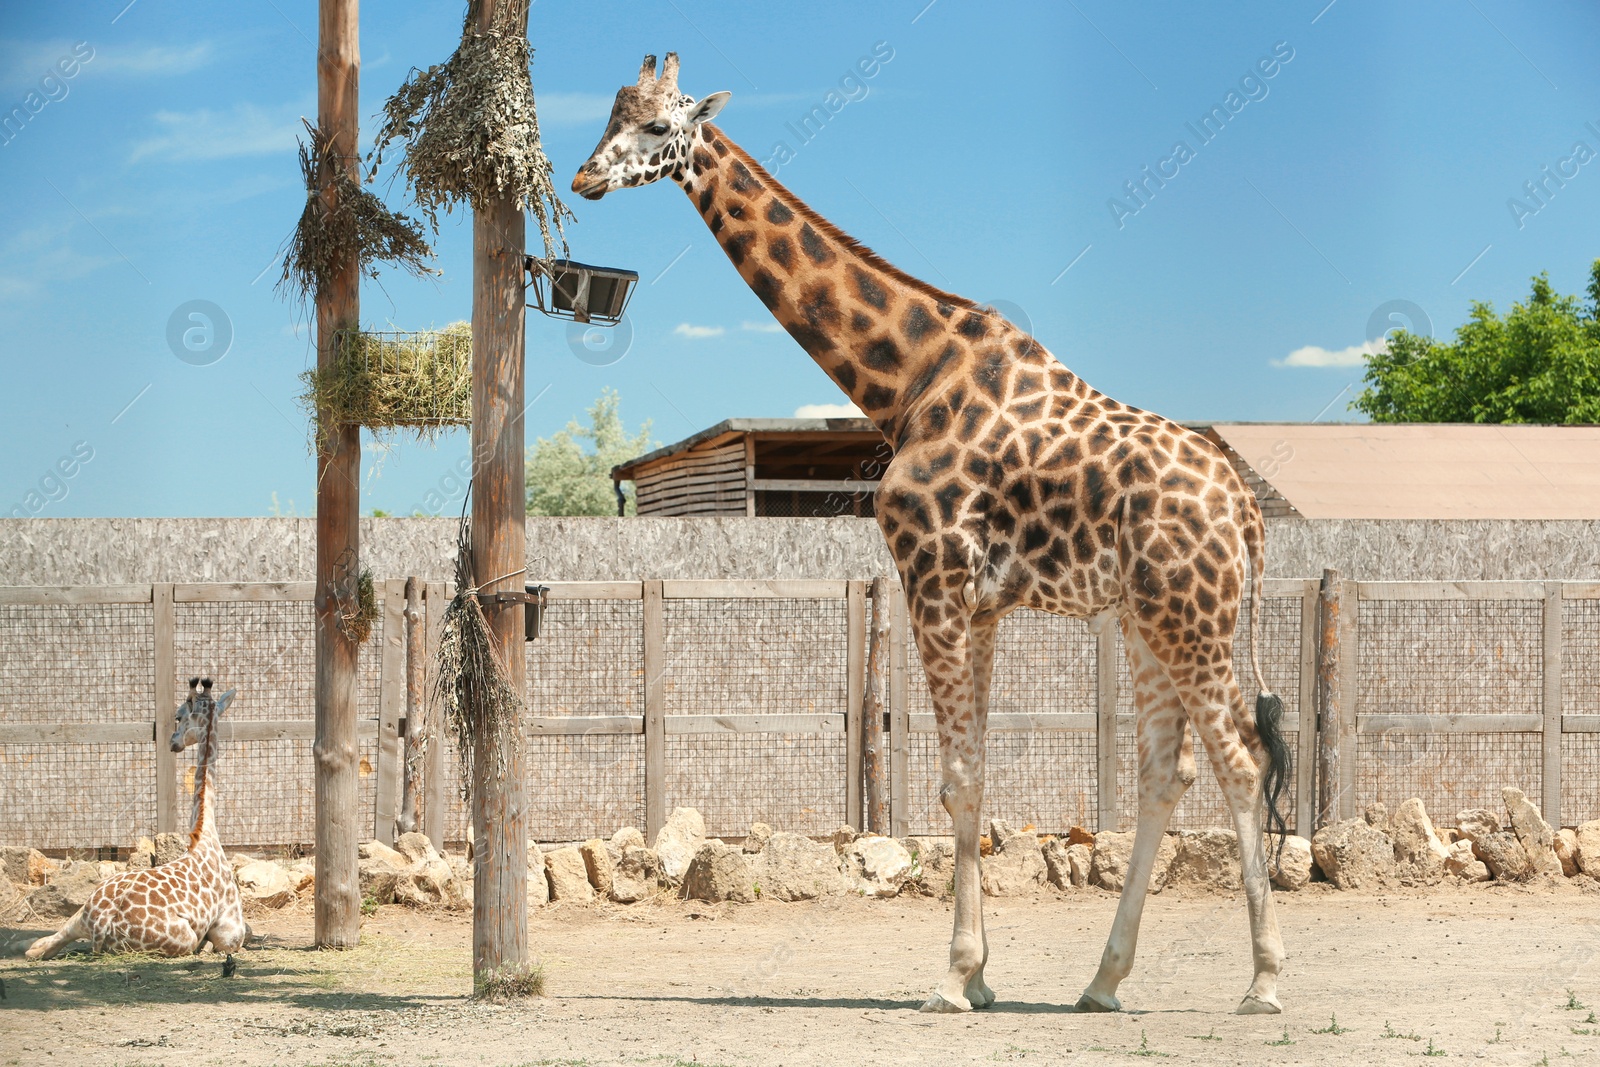 Photo of Rothschild giraffes at enclosure in zoo on sunny day